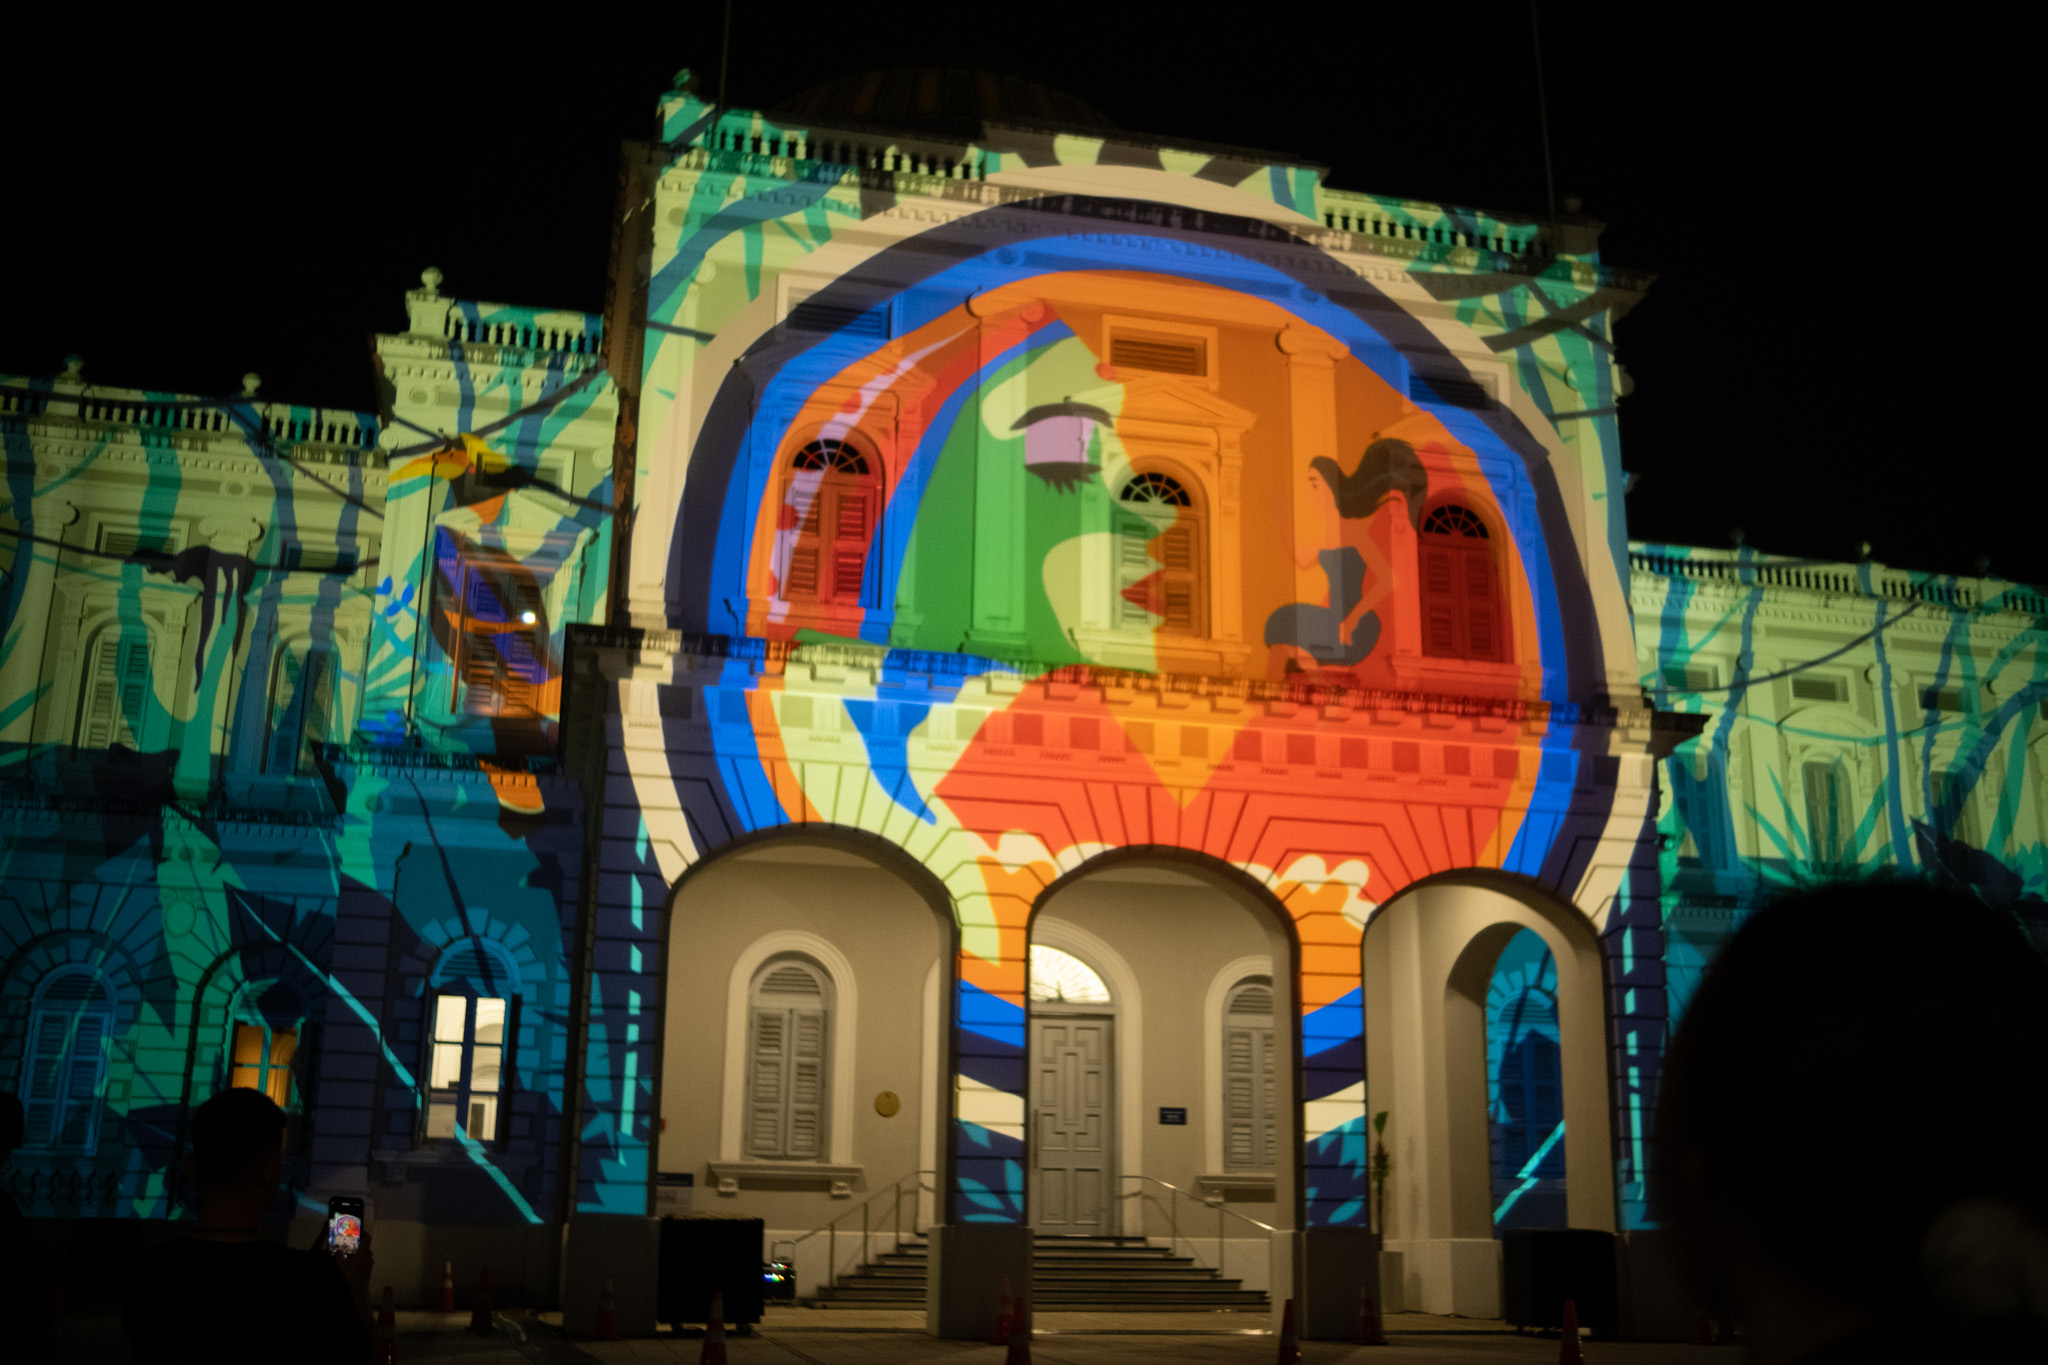 The 6-minute theatrical projection mapping showcase can be observed outside the National Museum of Singapore.